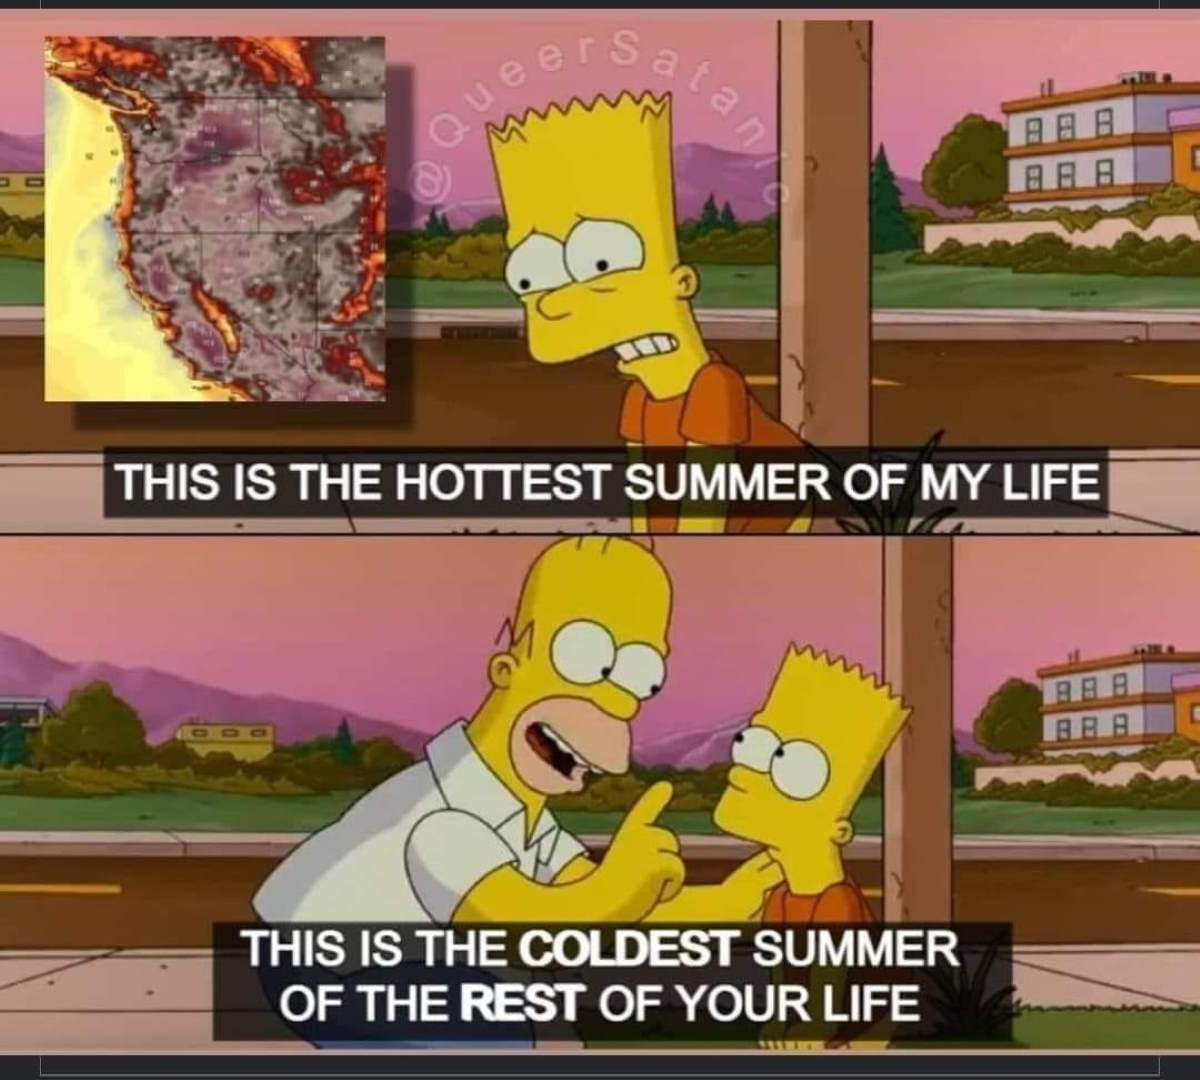 The Simpsons meme about global warming